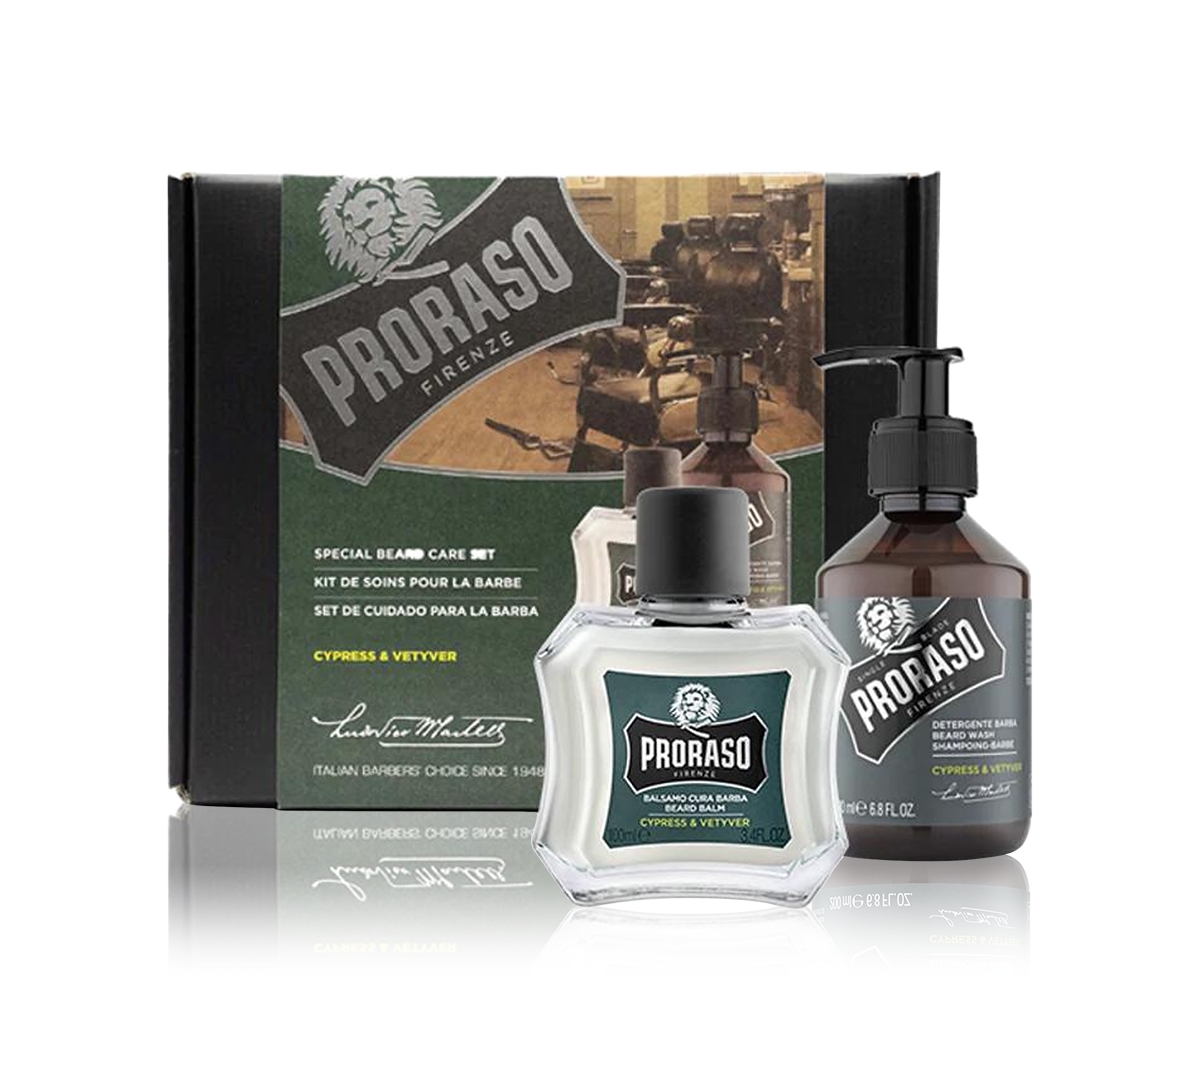 2-Pc. Beard Care Set For New Or Short Beards - Cypress & Vetyver Scent